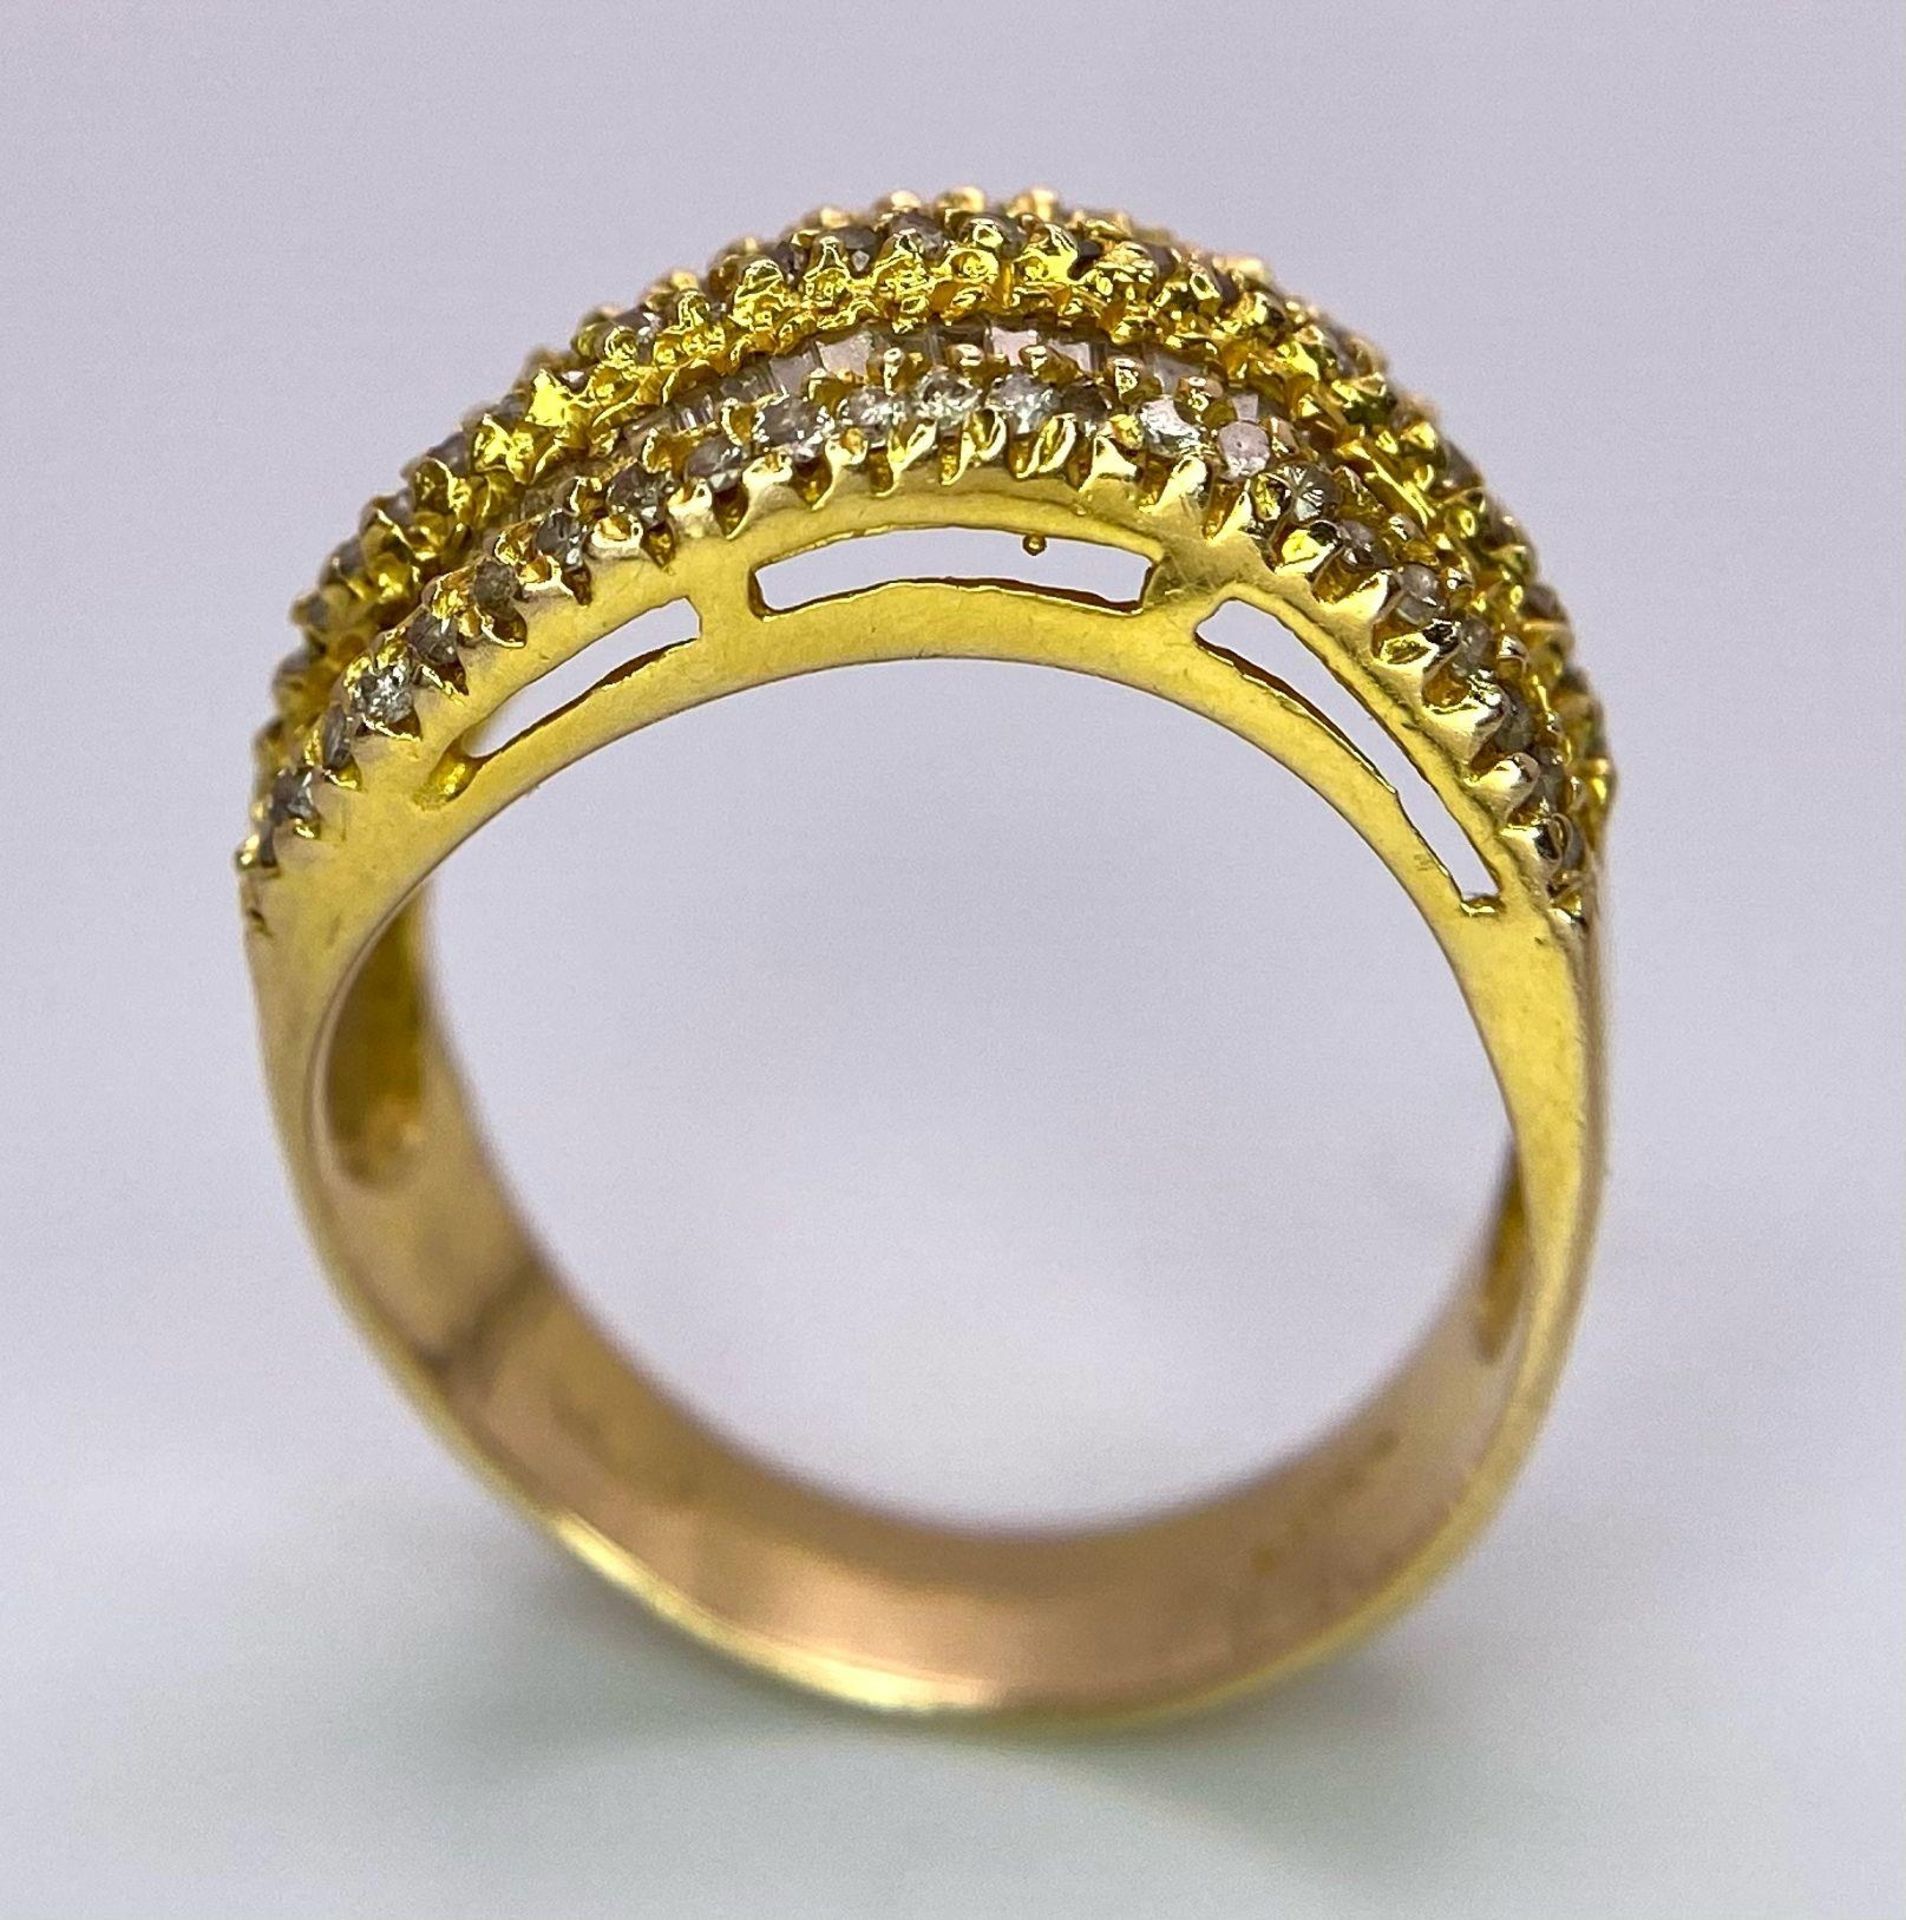 AN 18K YELLOW GOLD DIAMOND SET 5 ROW BAND RING. 1.10CTW OF ROUND BRILLIANT AND TAPERED BAGUETTE - Bild 3 aus 5